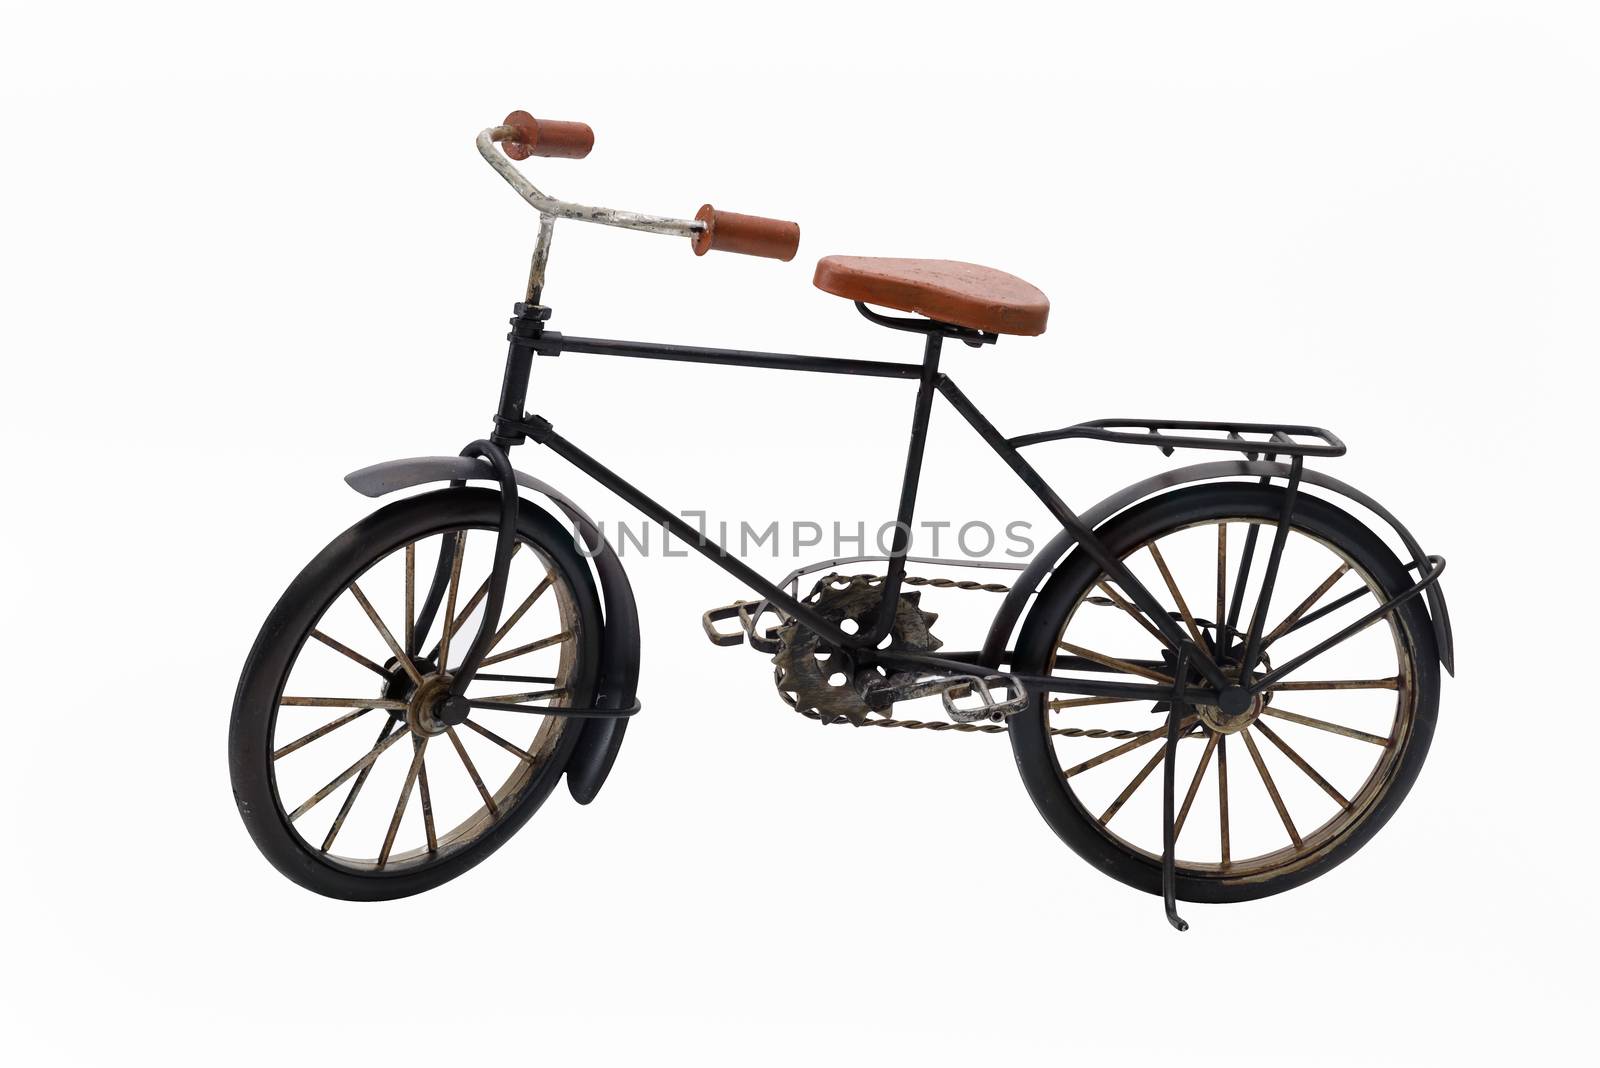 Antique bicycle isolated on white background.